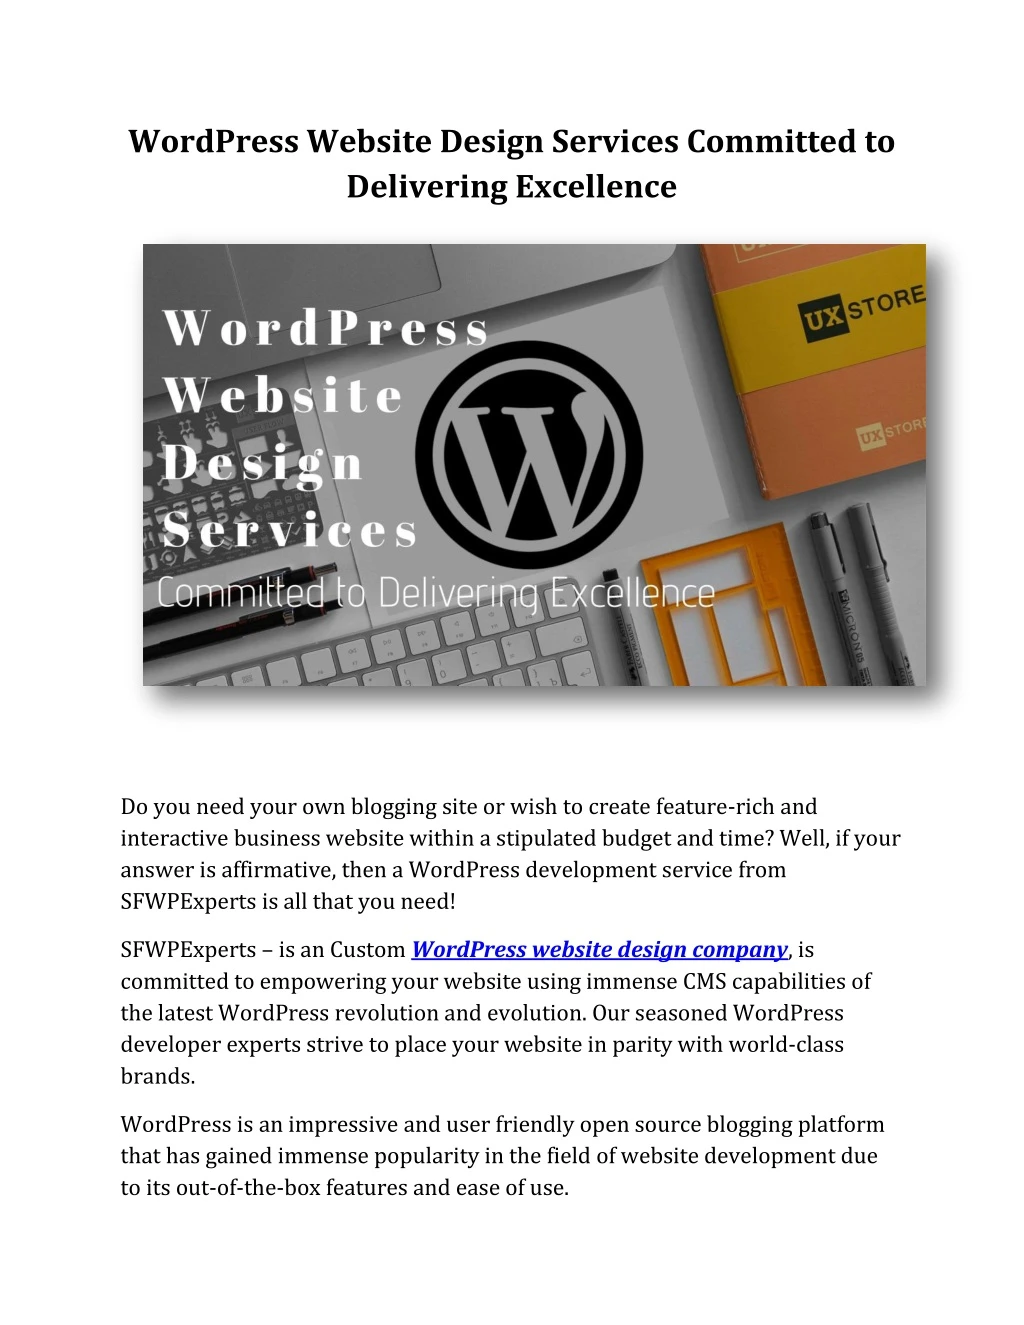 wordpress website design services committed